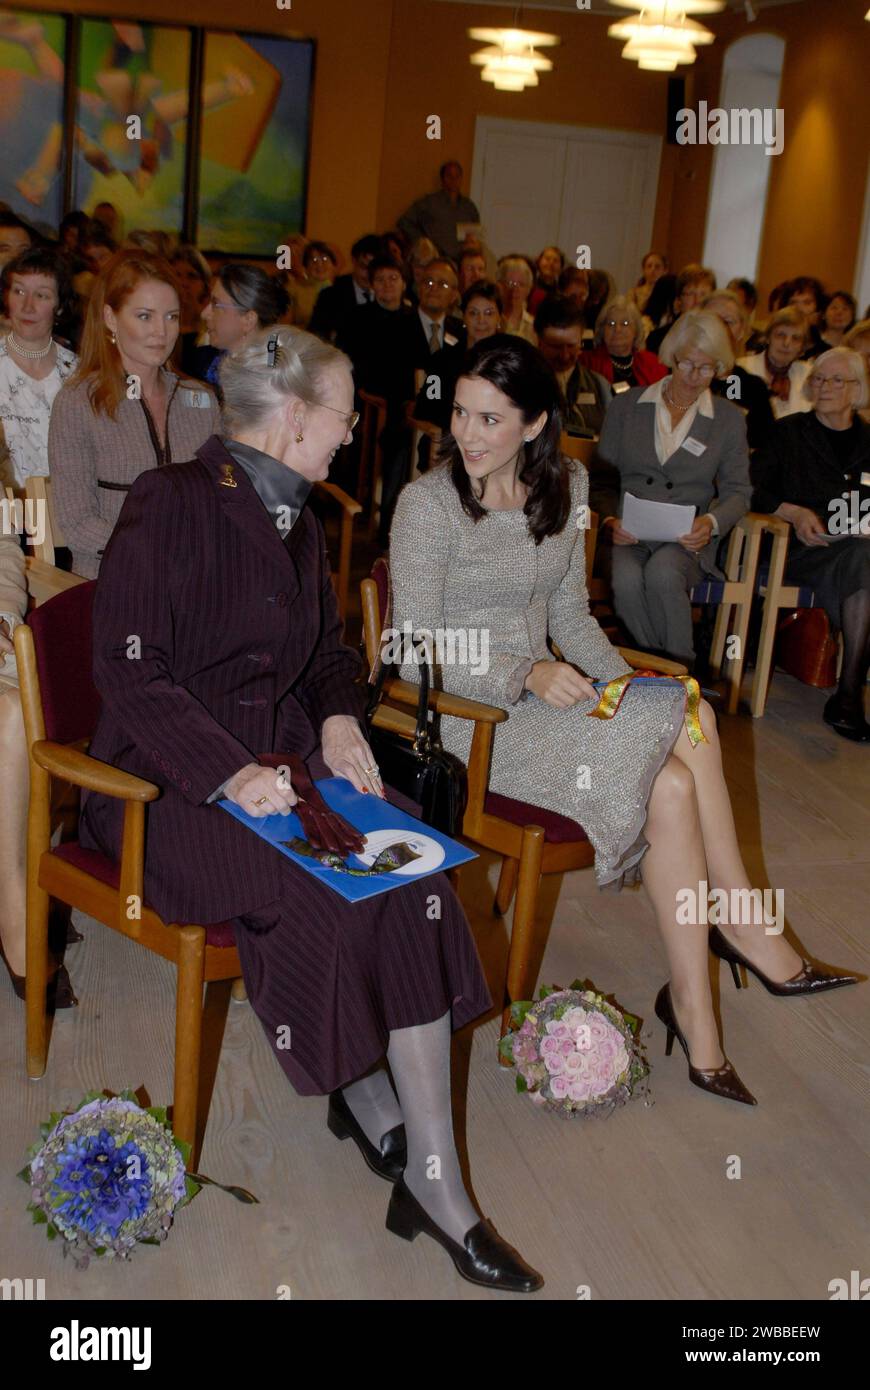 H.M.The Queen Margrethe & Crown princess Mary Donaldson together attended ICOM Costume meeting A glimpse of Danish Costume History at Vortov grundvig insitute in Copenhagen Denmark Oct.9,2006 Stock Photo